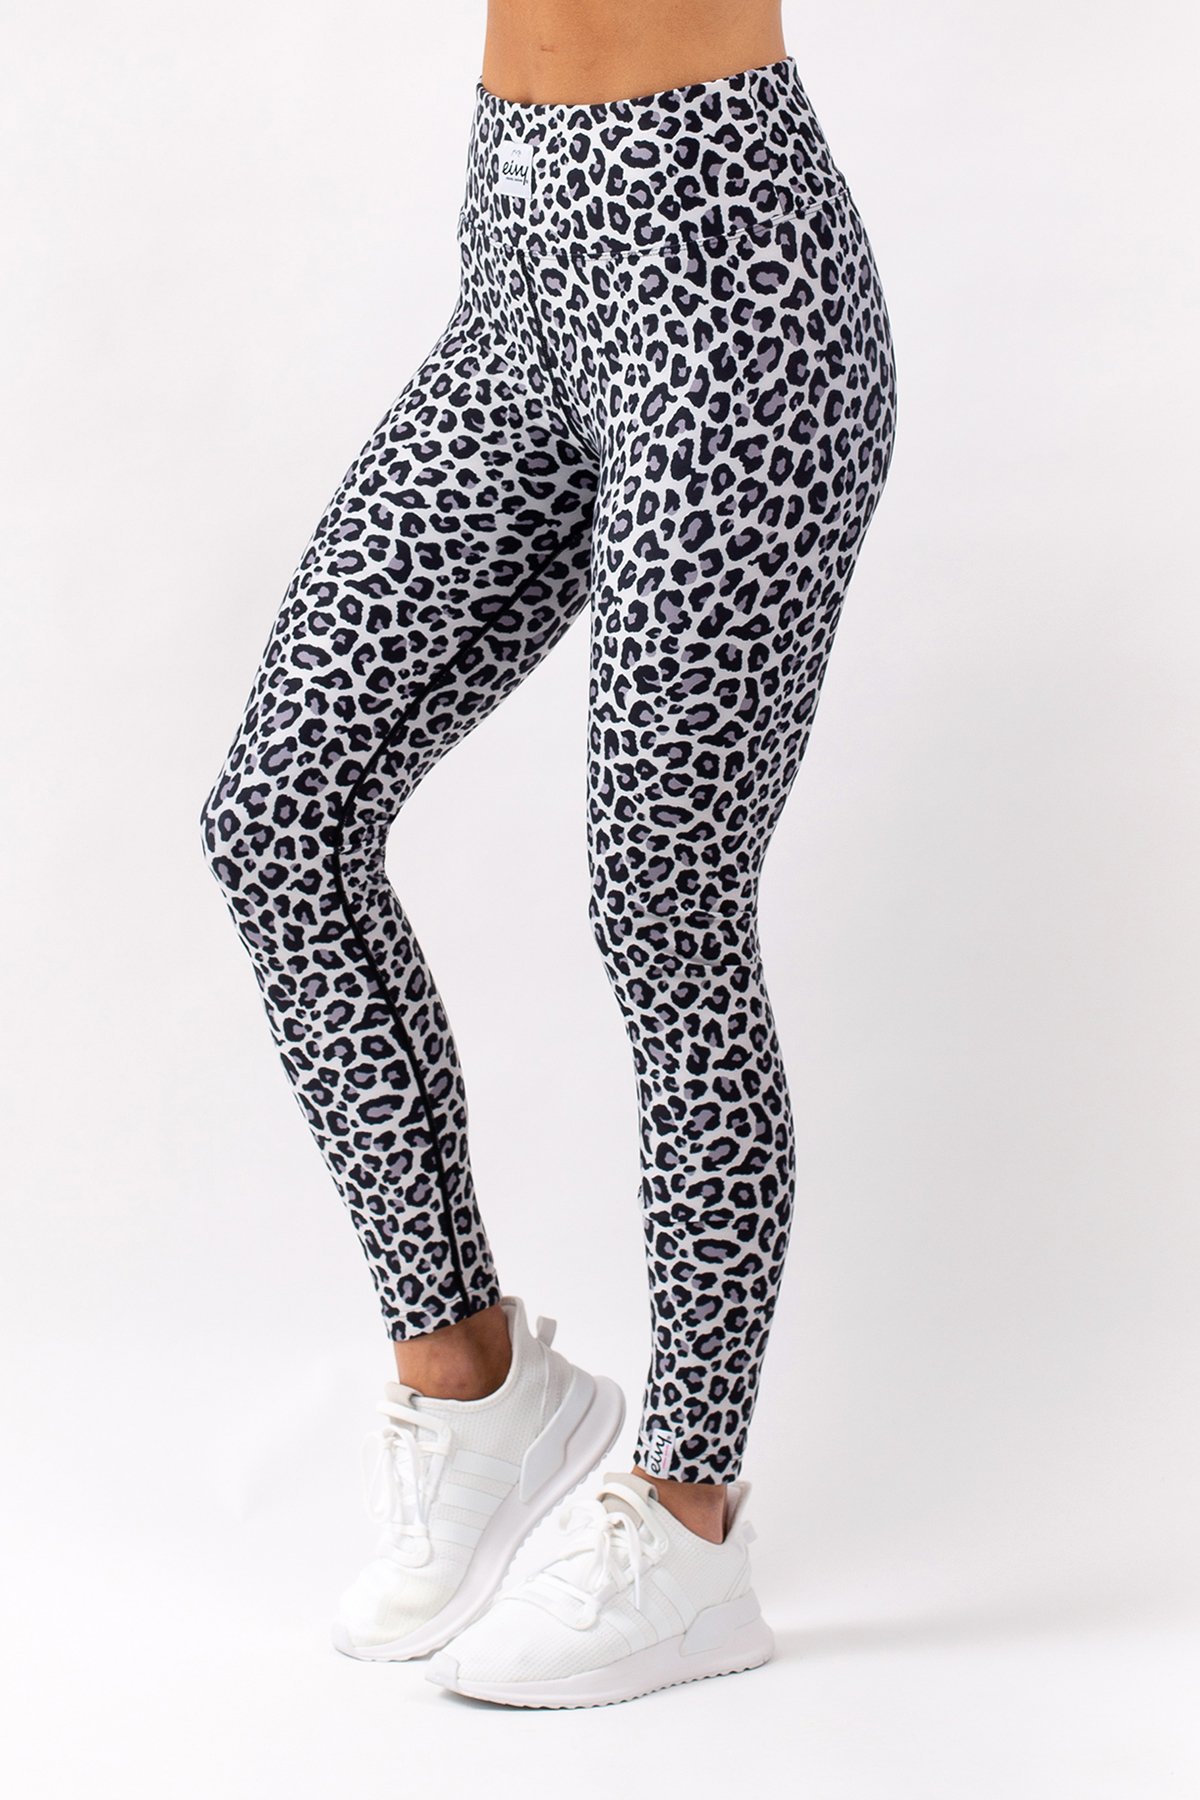 Eivy Icecold base layer legging in leopard